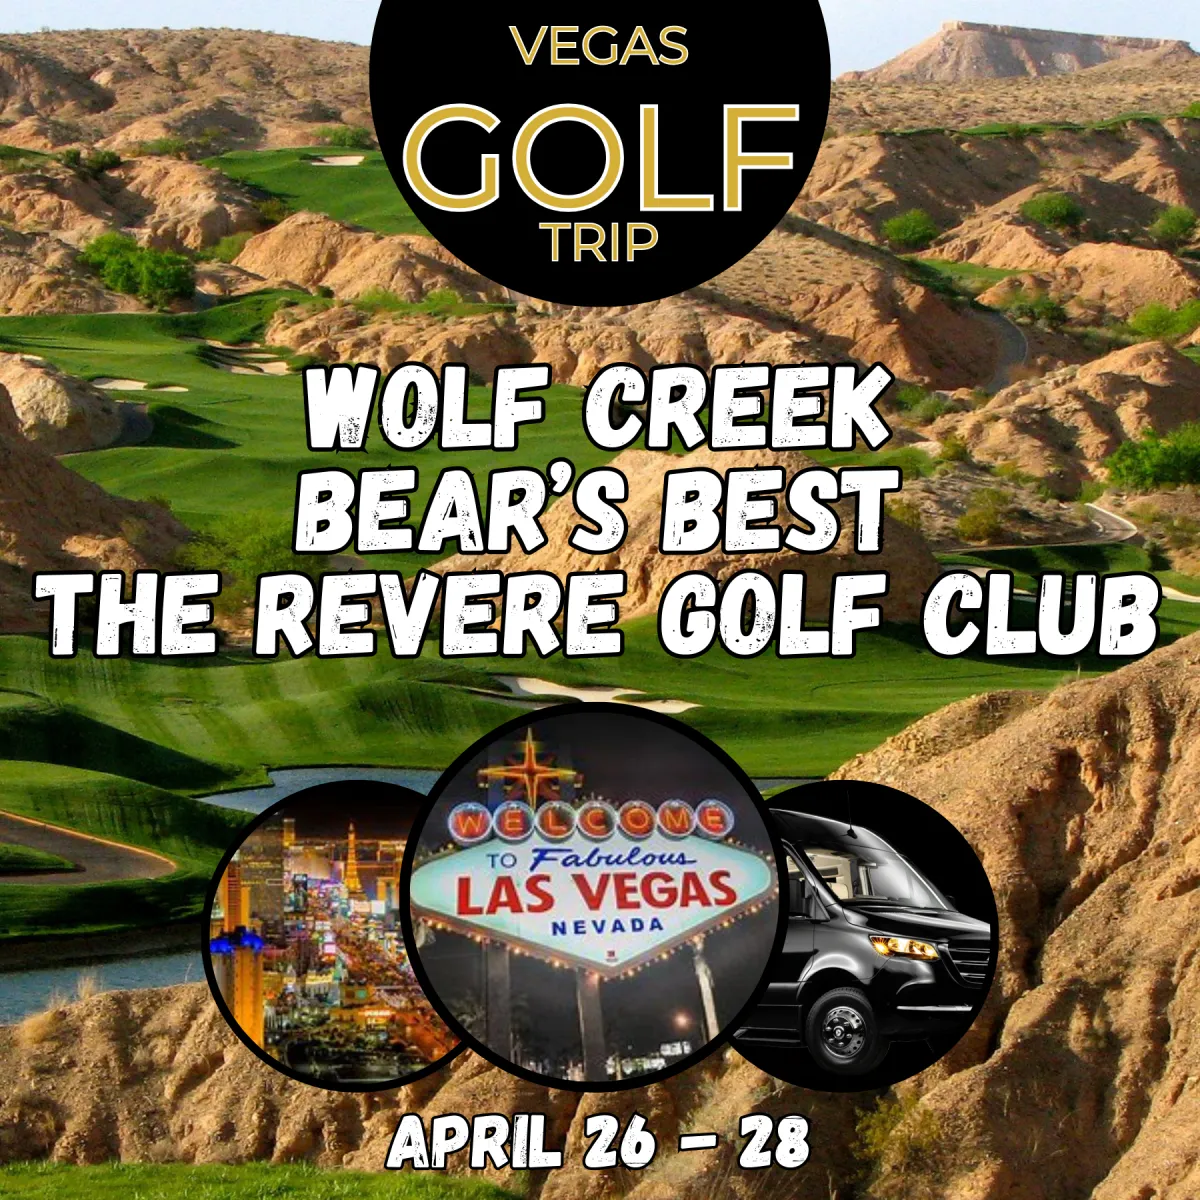 quick golf trip from phoenix to Vegas to play wolf creek